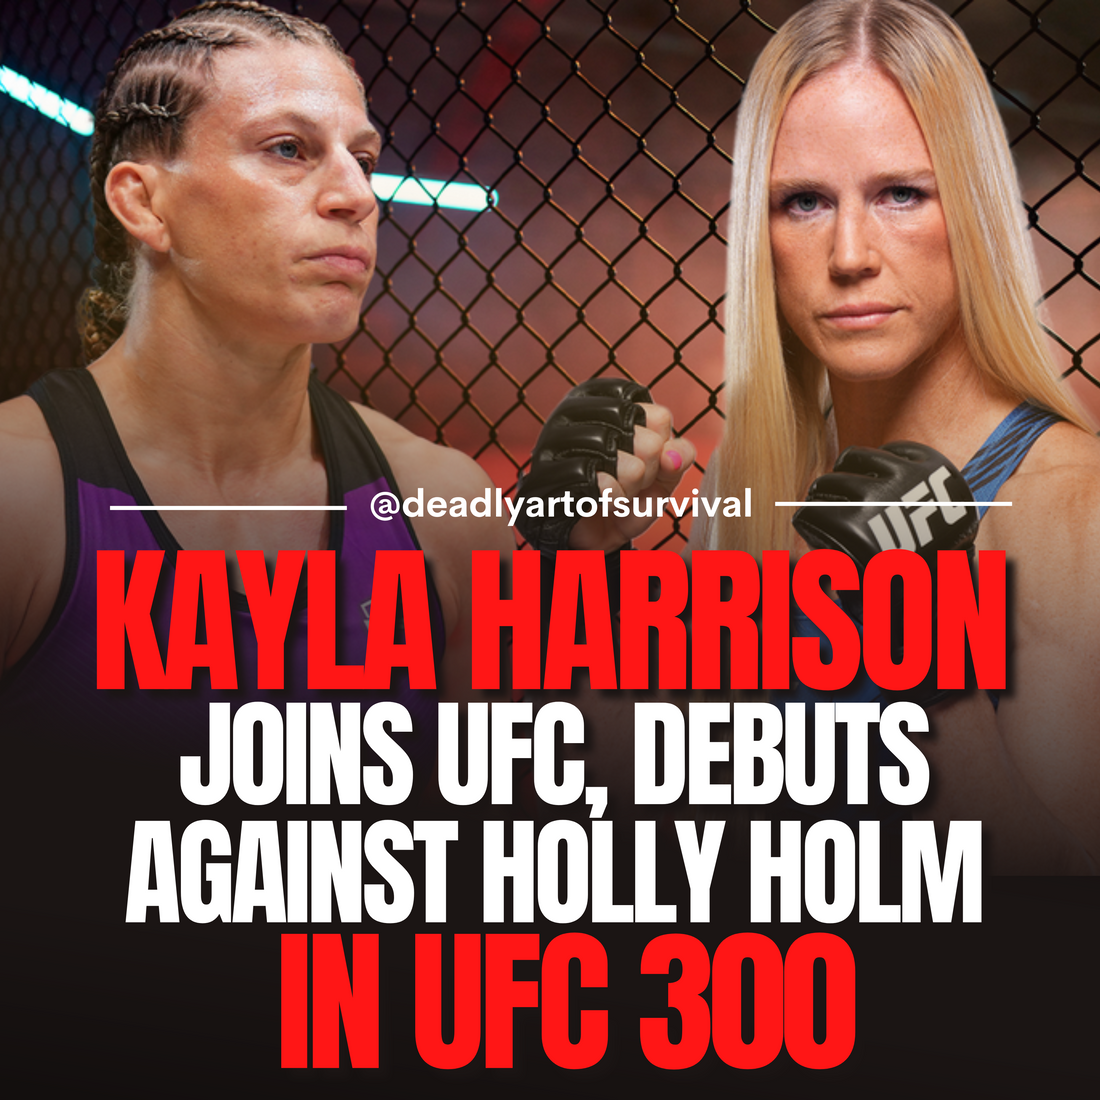 Kayla-Harrison-Joins-UFC-Debuting-Against-Holly-Holm-in-Bantamweight-Clash-at-UFC-300 deadlyartofsurvival.com